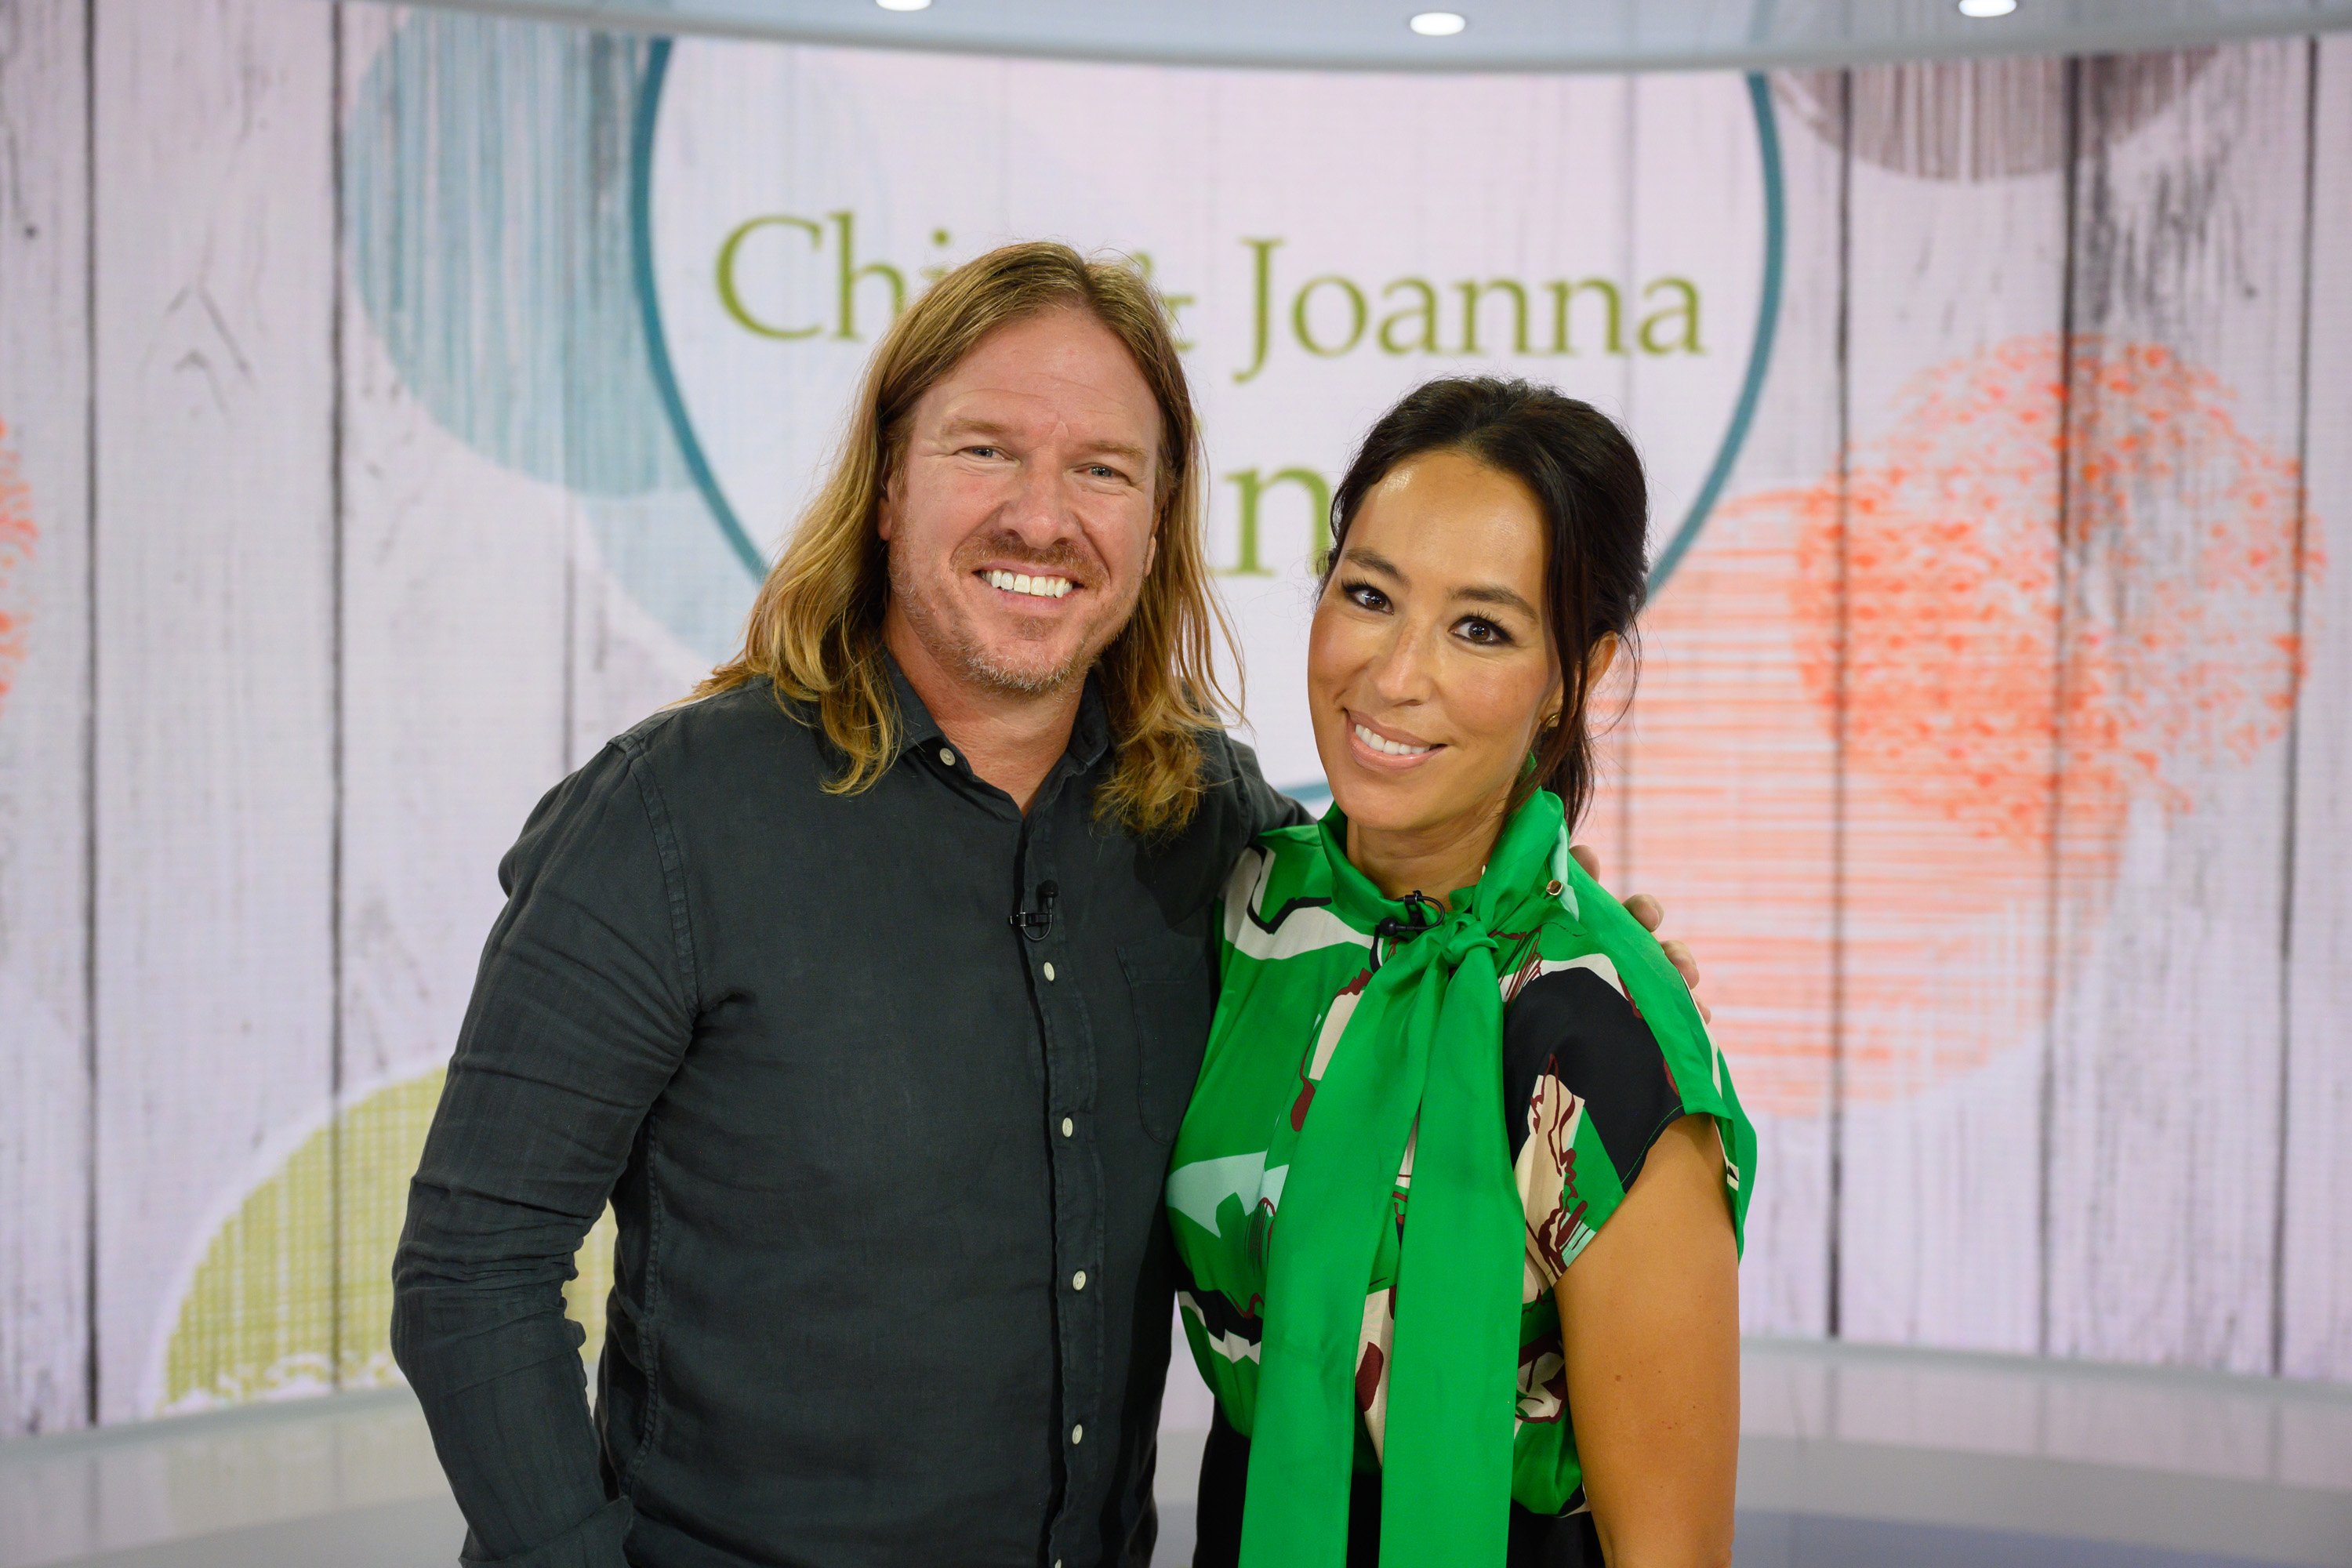 Chip and Joanna Gaines on the Today show